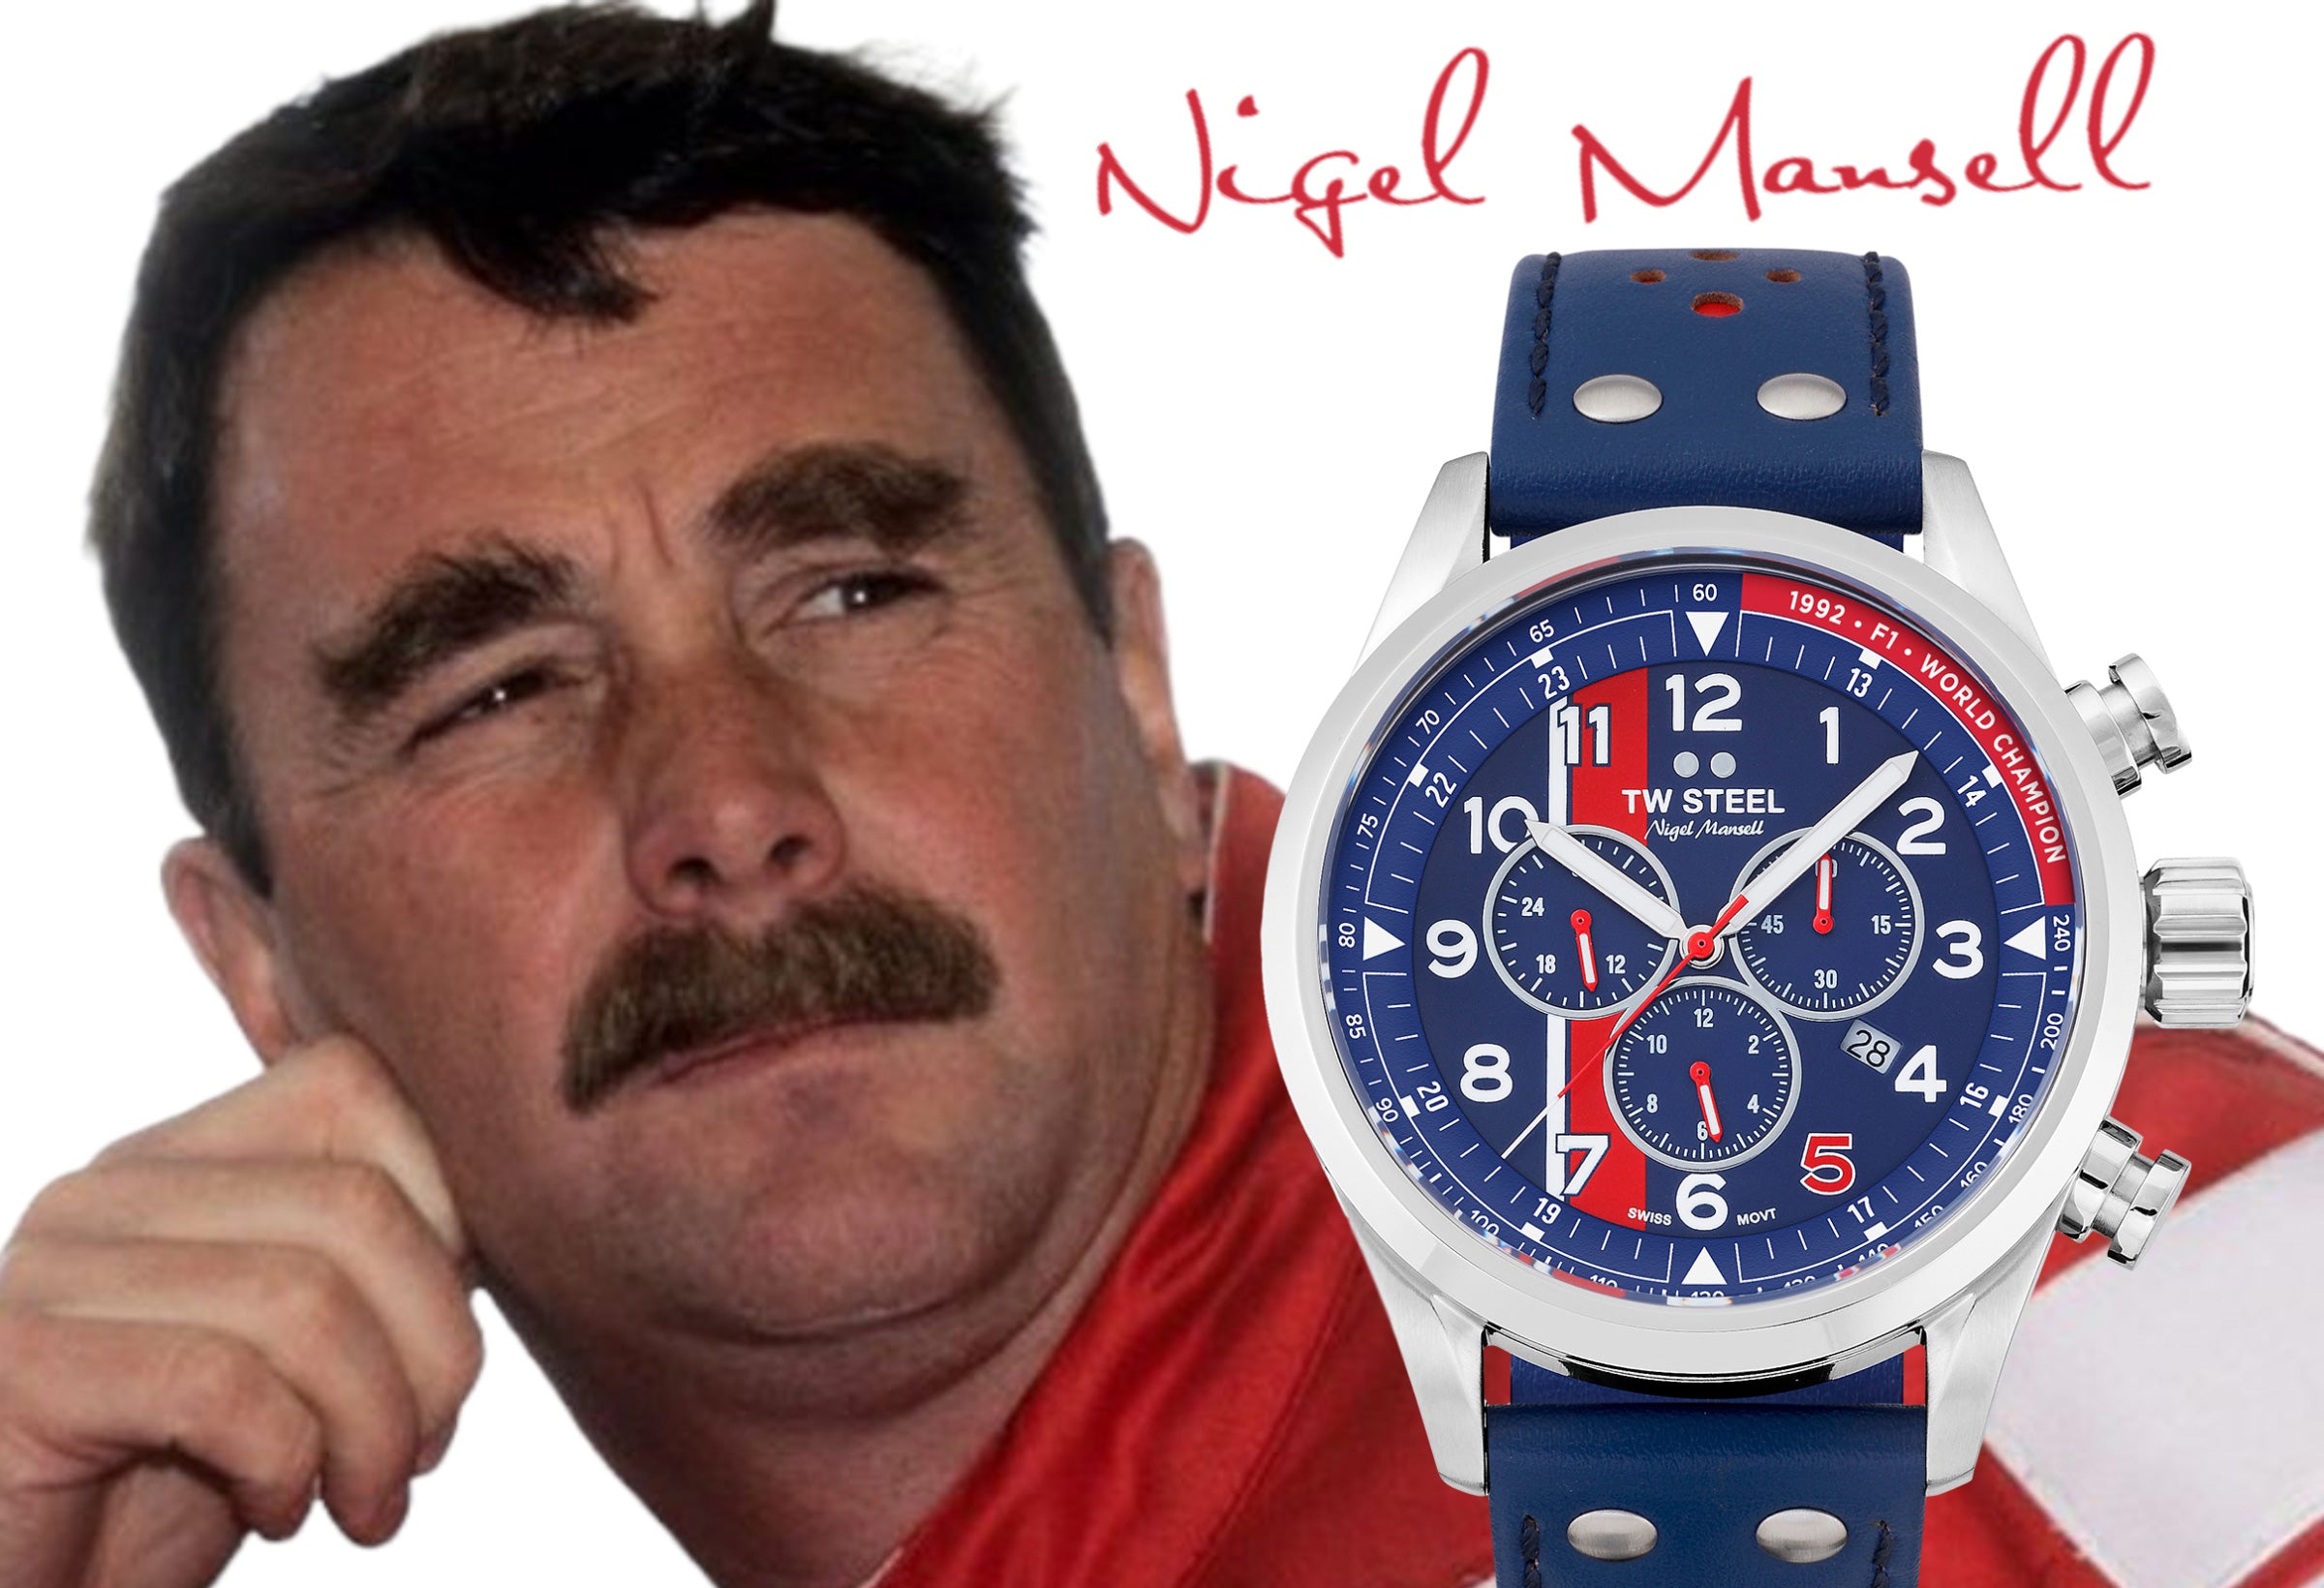 TW STEEL NIGEL MANSELL LIMITED EDITION WATCHES